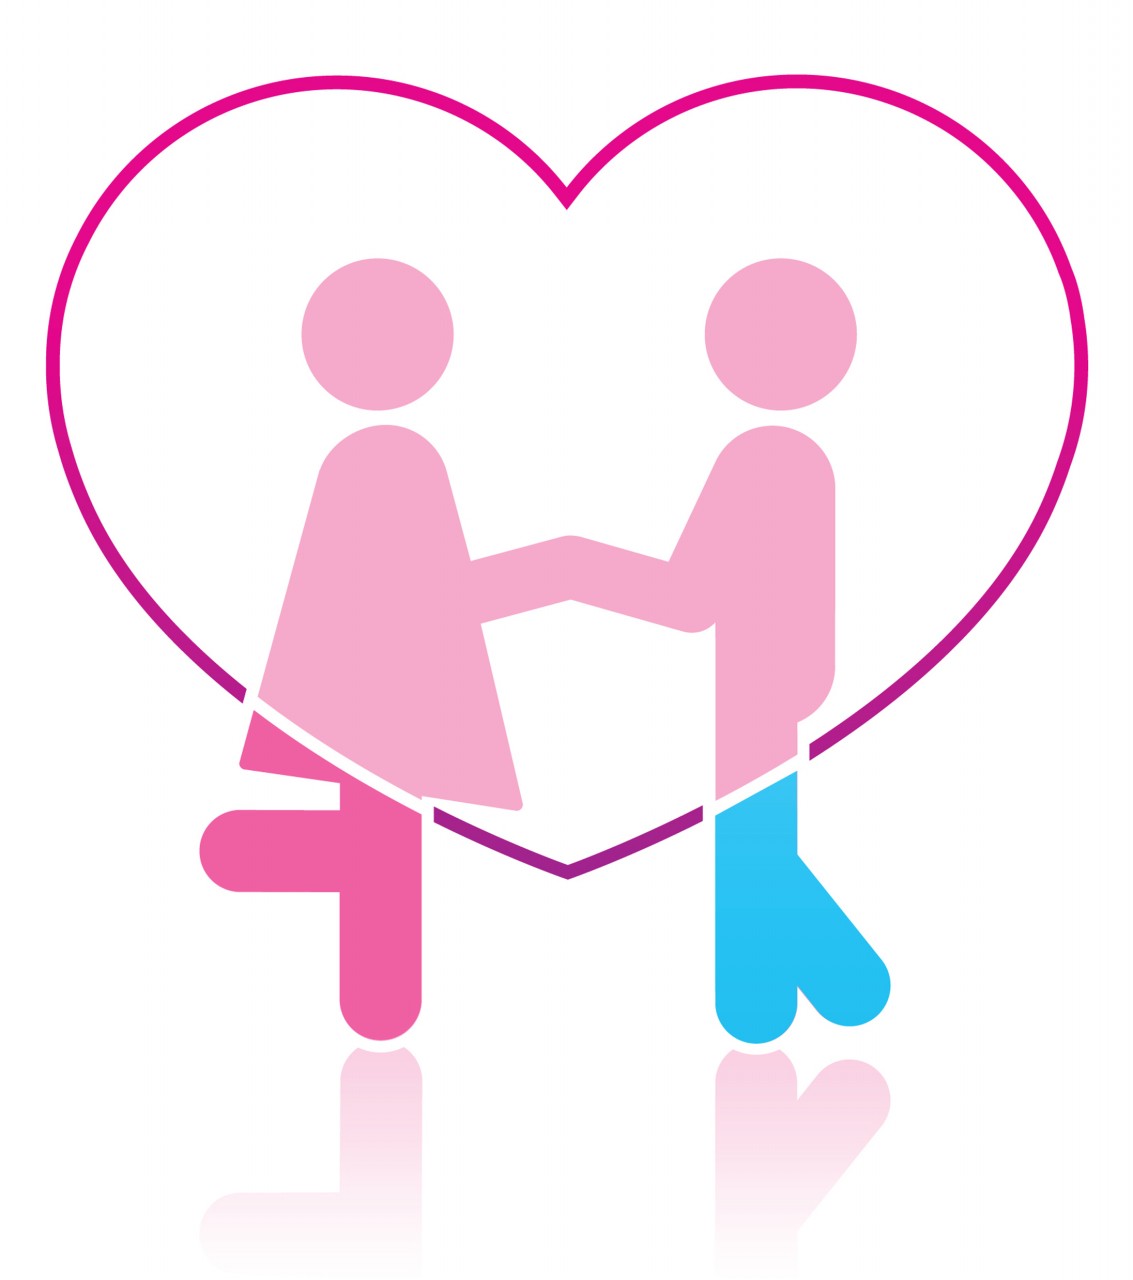 People in love clipart free clipart images clipartwiz